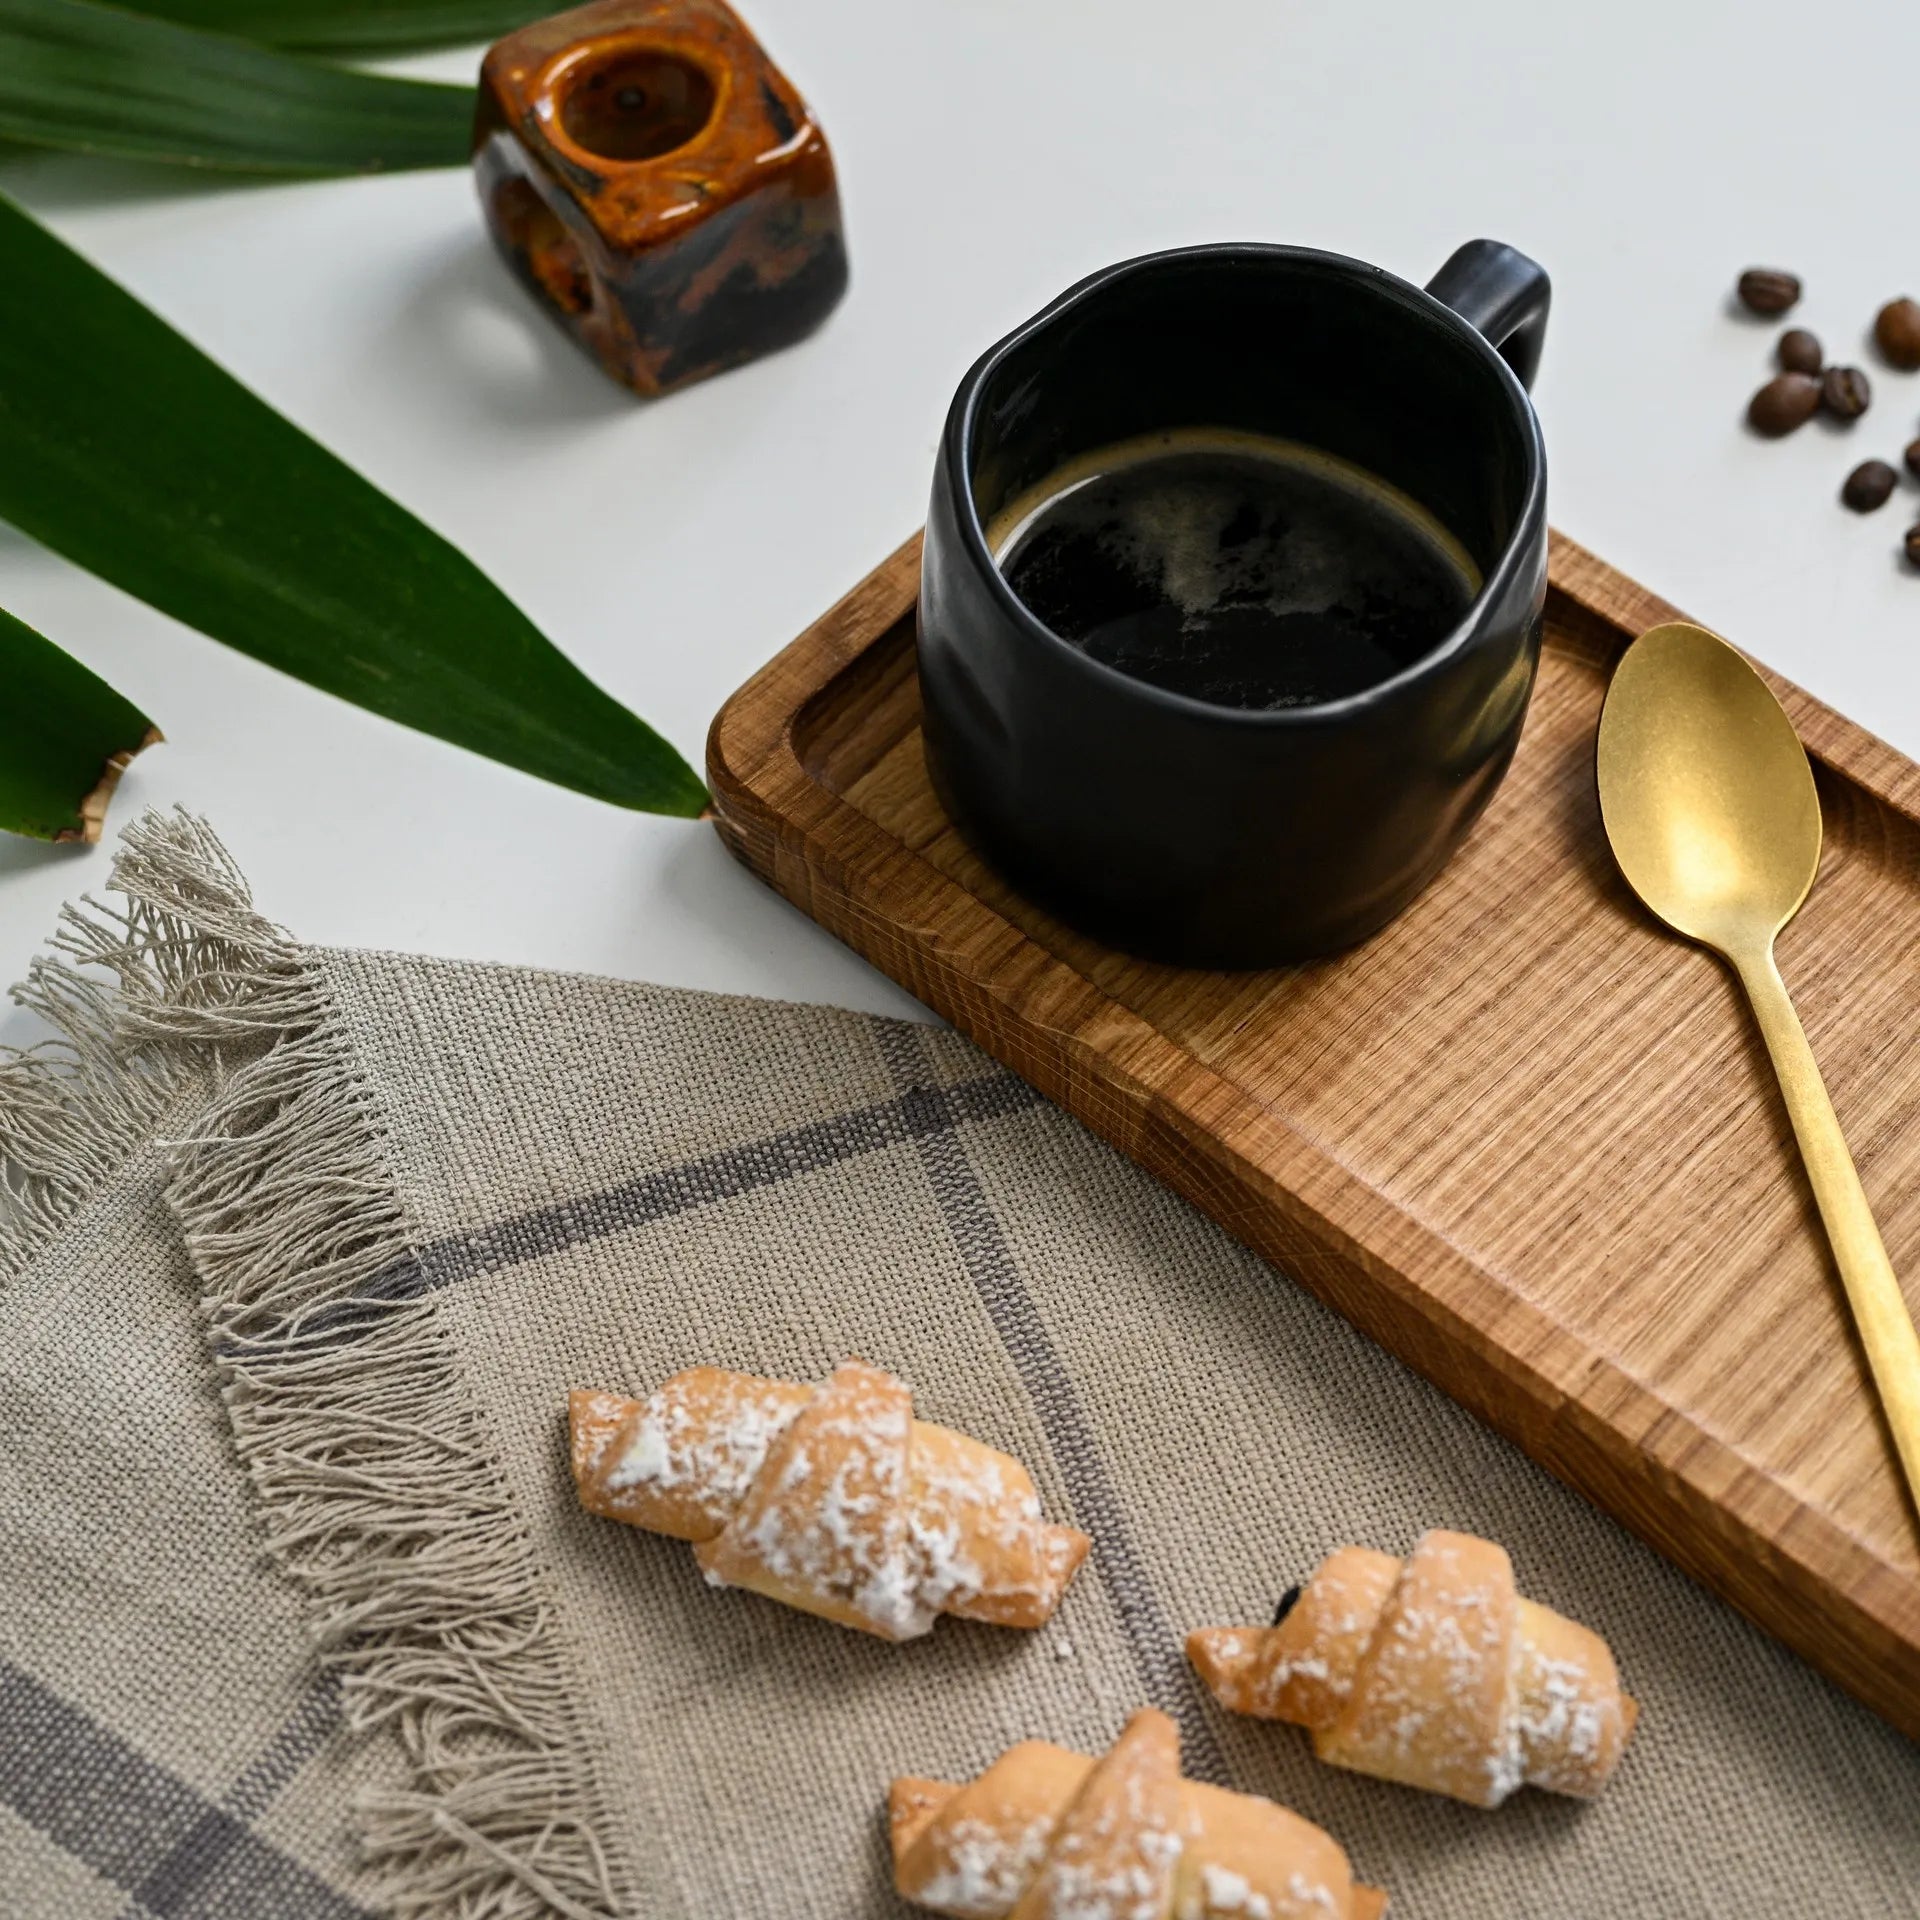 Serve coffee in style at your cafe with our beautifully designed wooden serving tray.